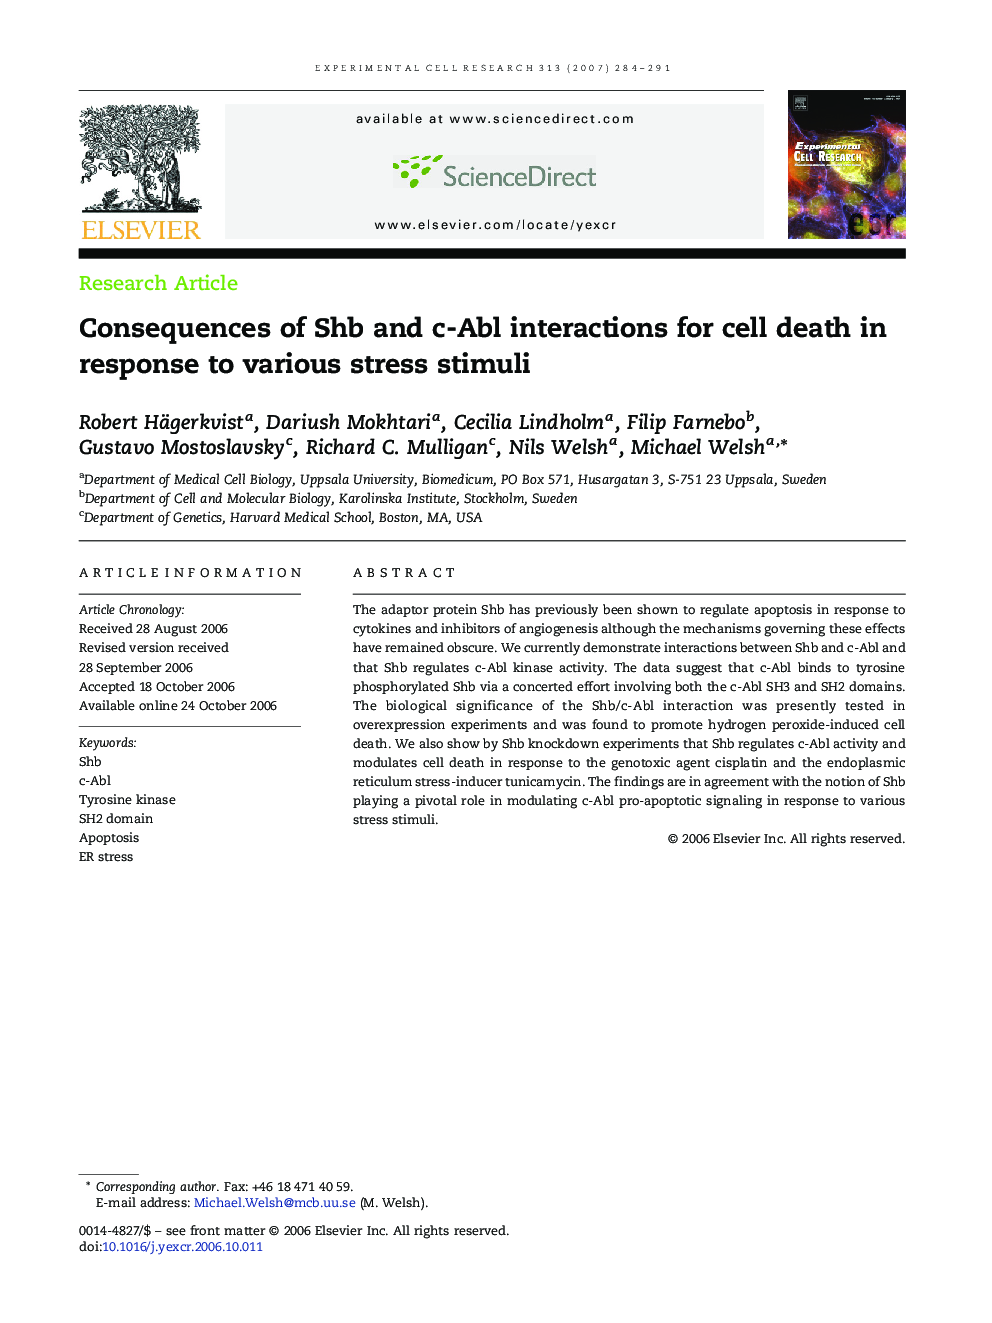 Consequences of Shb and c-Abl interactions for cell death in response to various stress stimuli